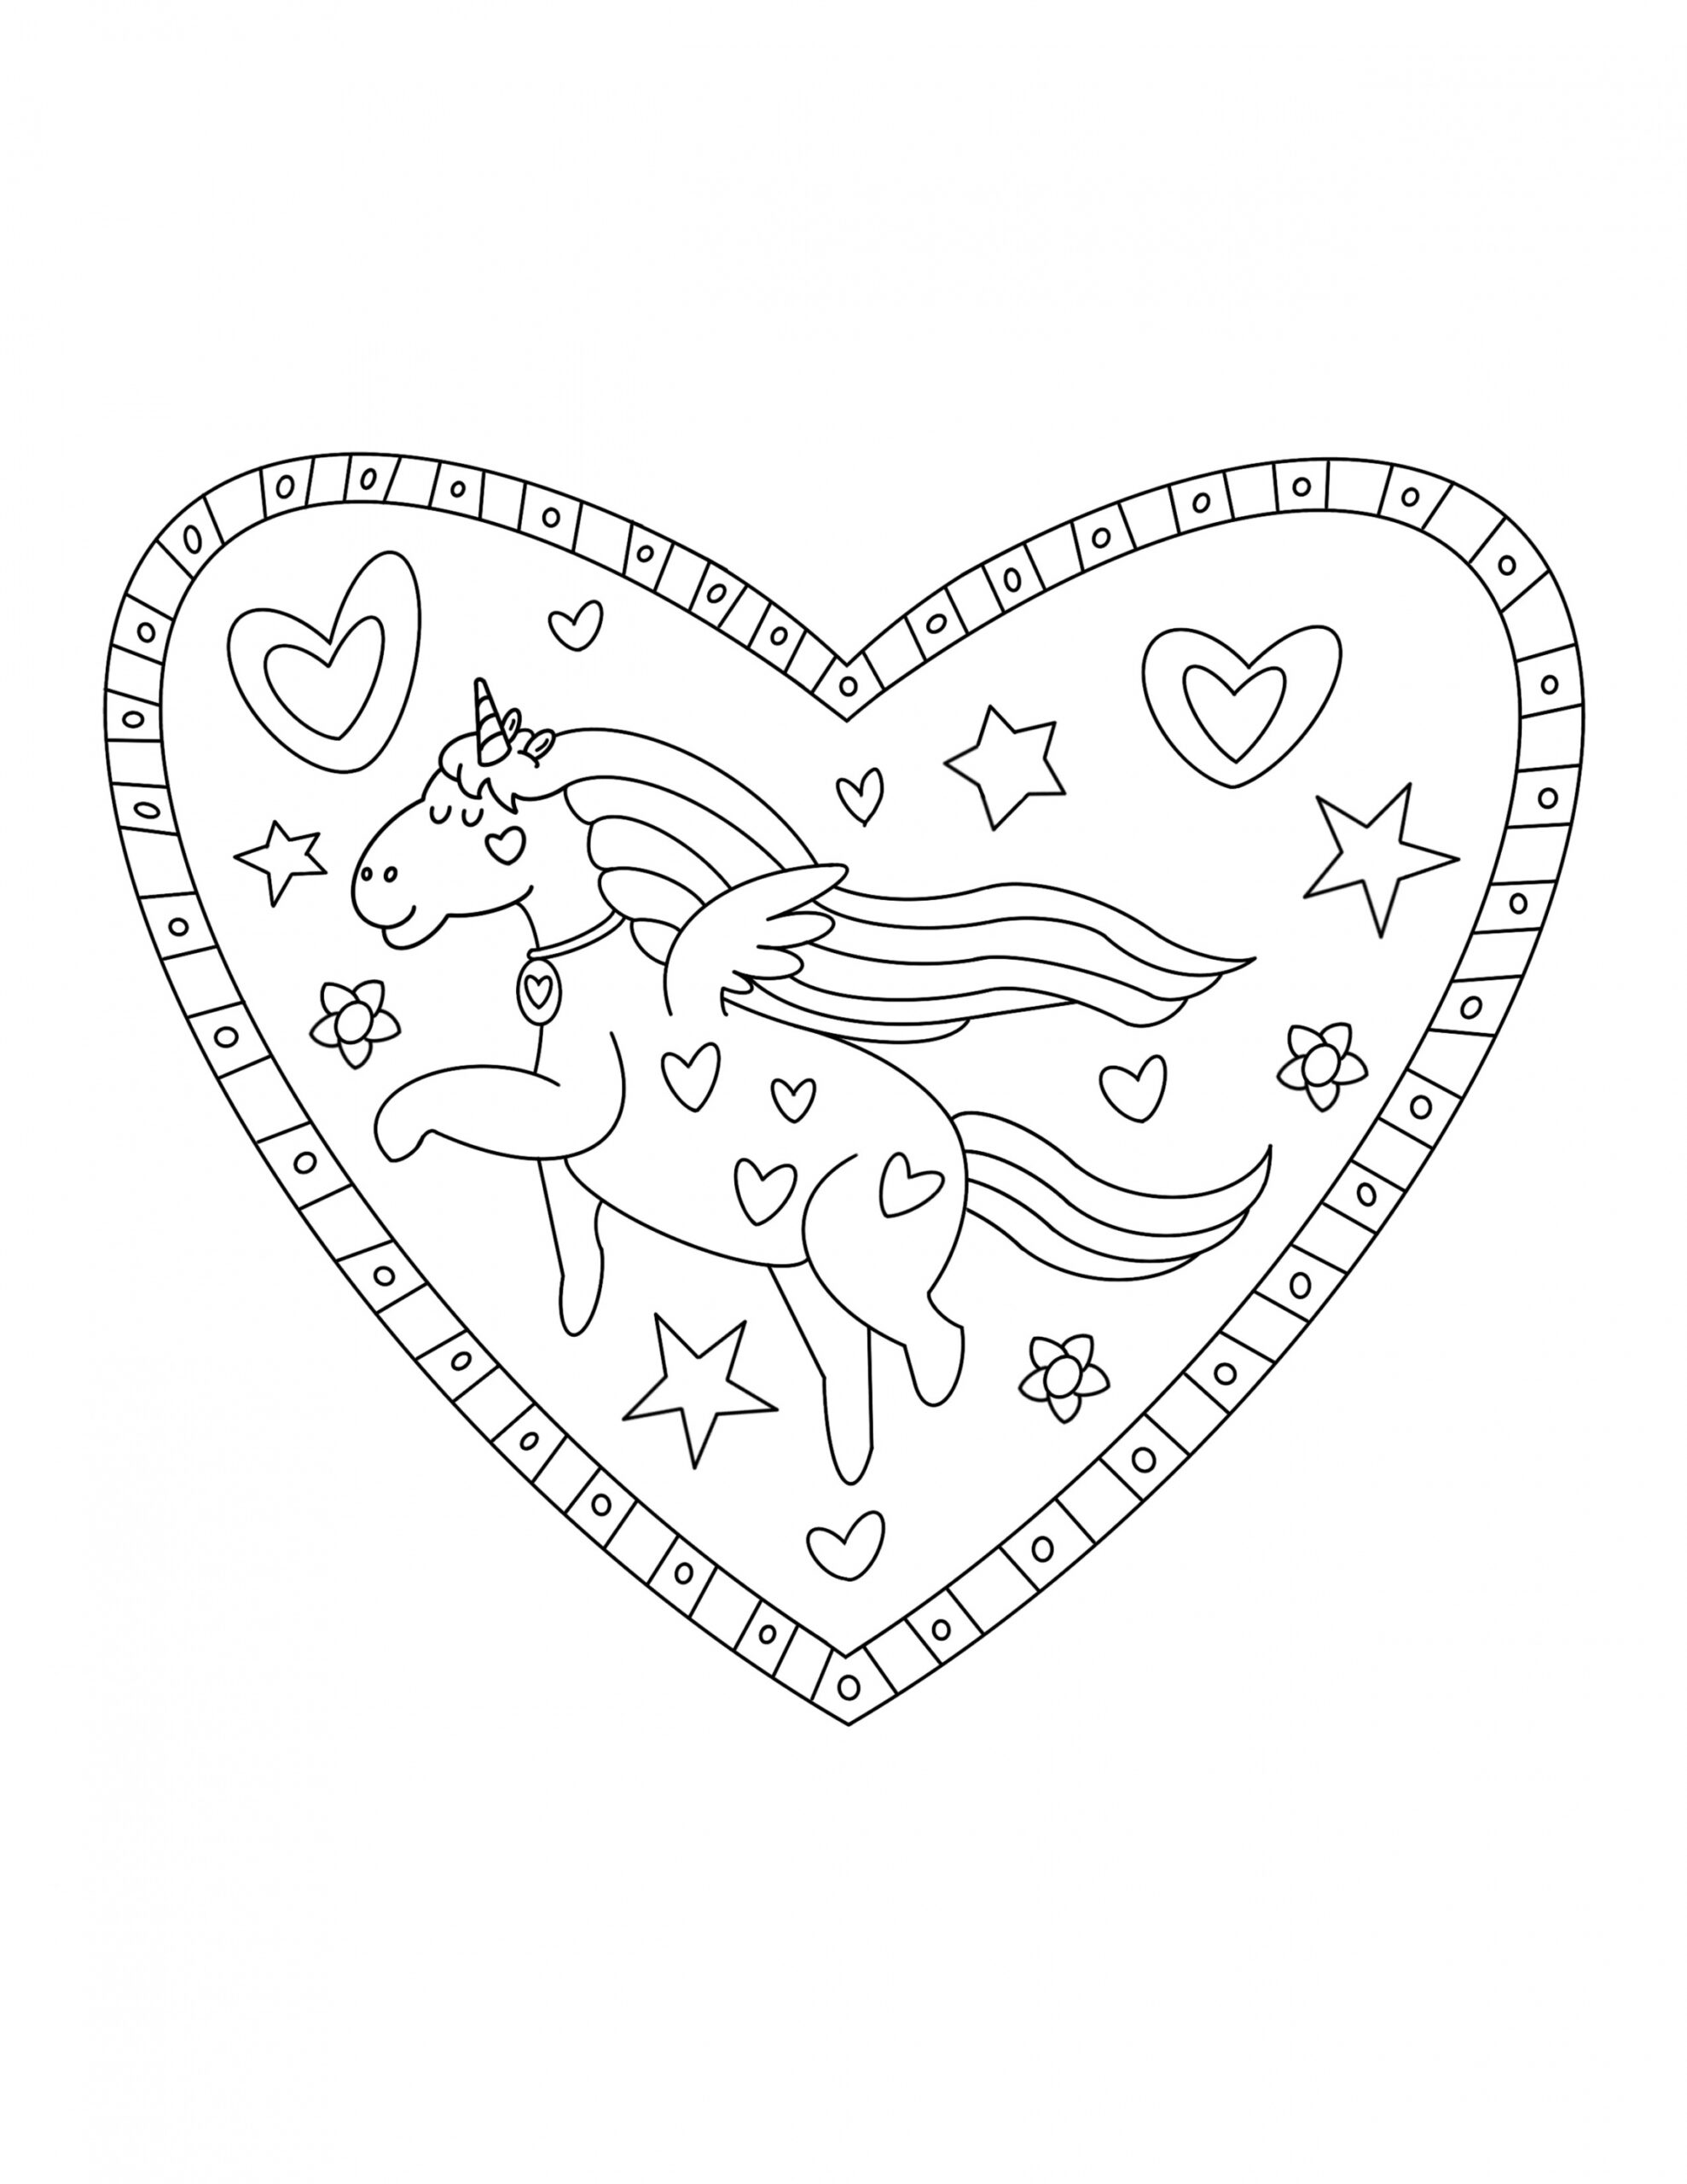 Free Unicorn Coloring Pages - Daily Printables - FREE Printables - Unicorn Heart Coloring Pages